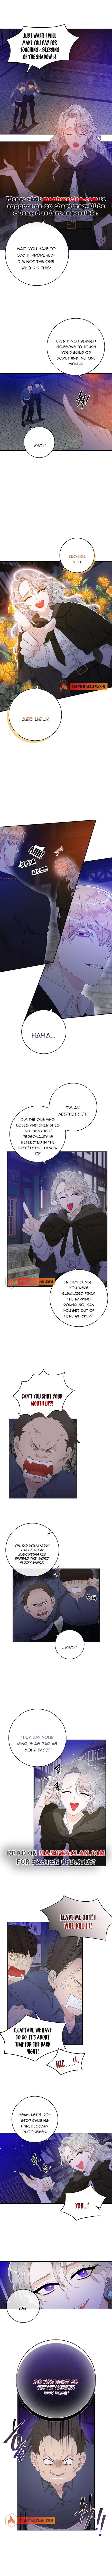 I Only Treat Villains Chapter 4 page 6 - MangaWeebs.in